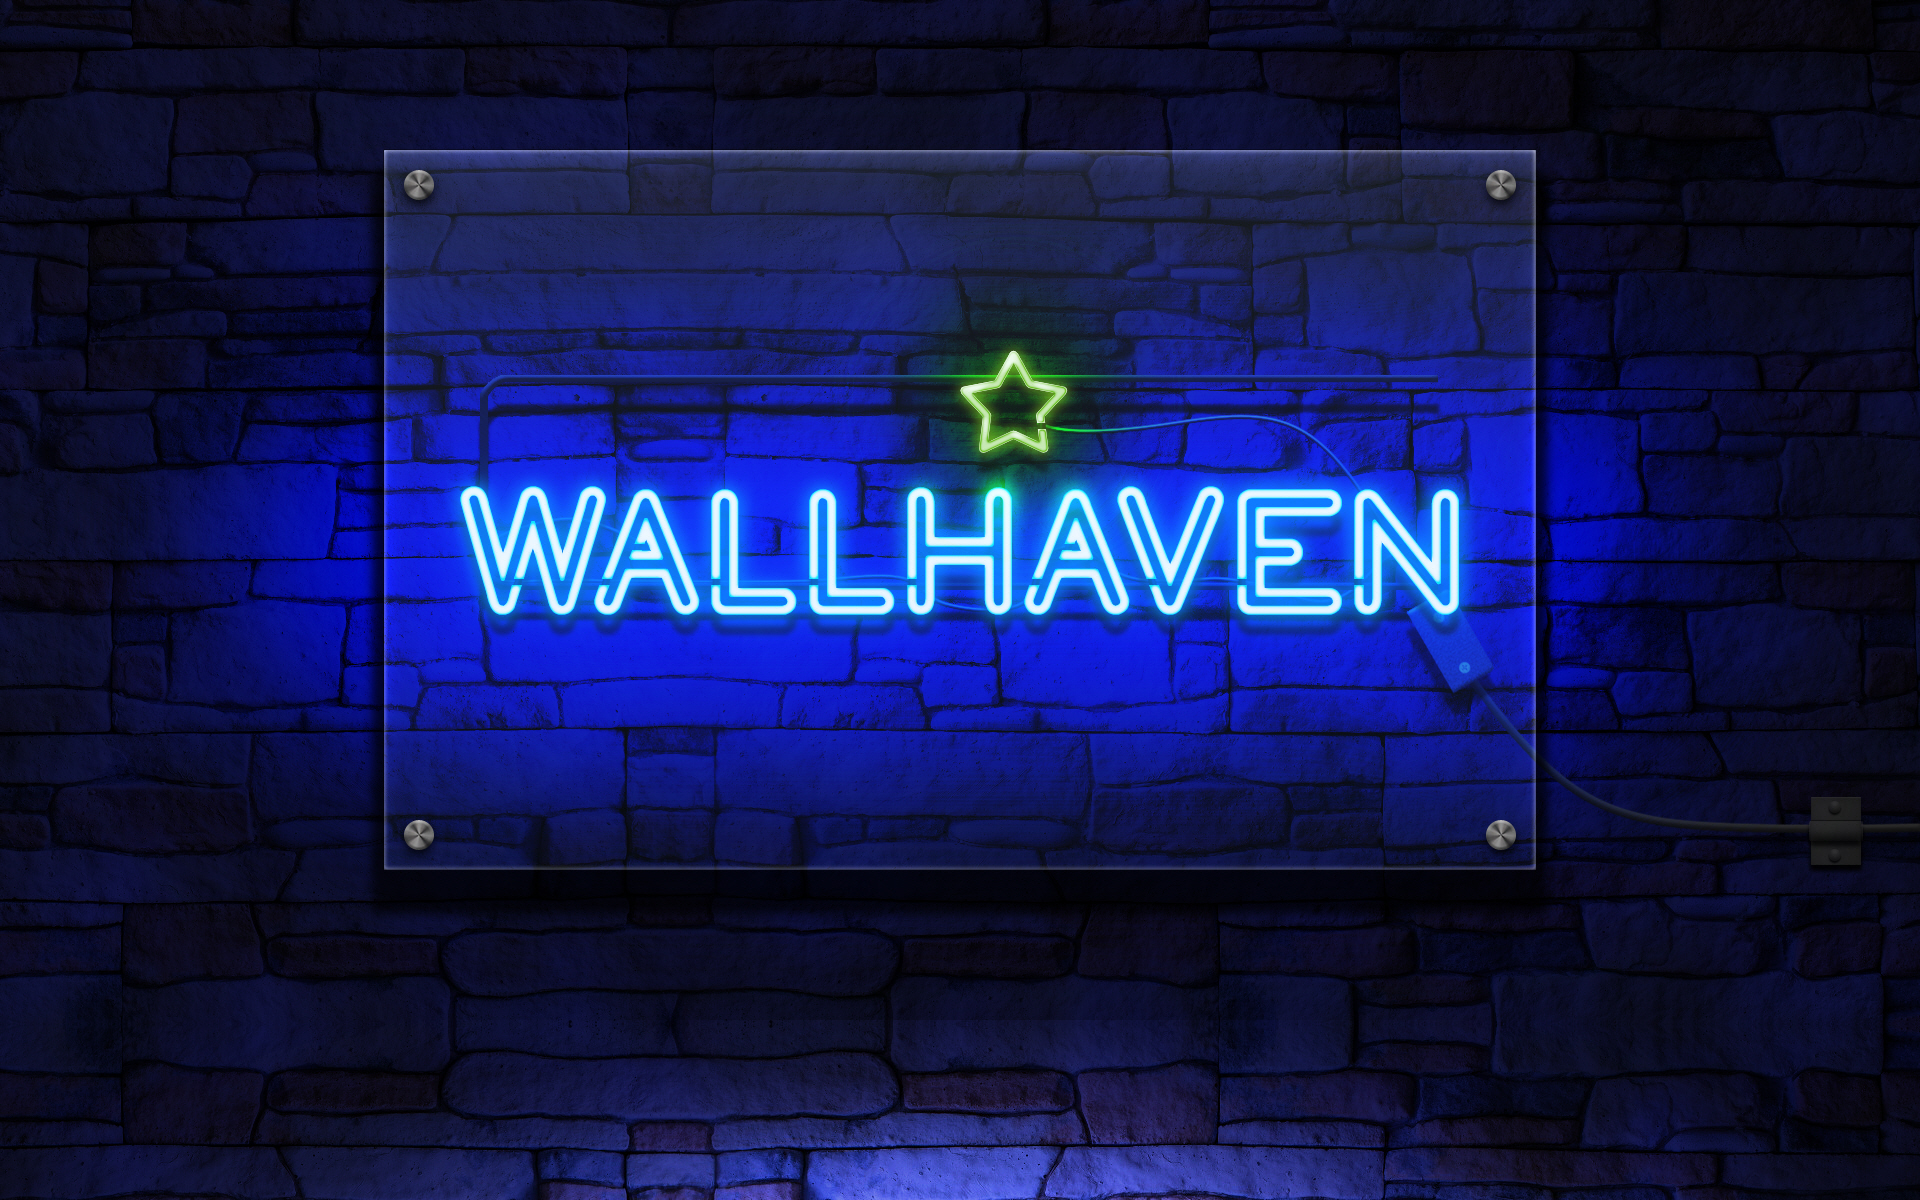 General 1920x1200 wallhaven neon sign blue